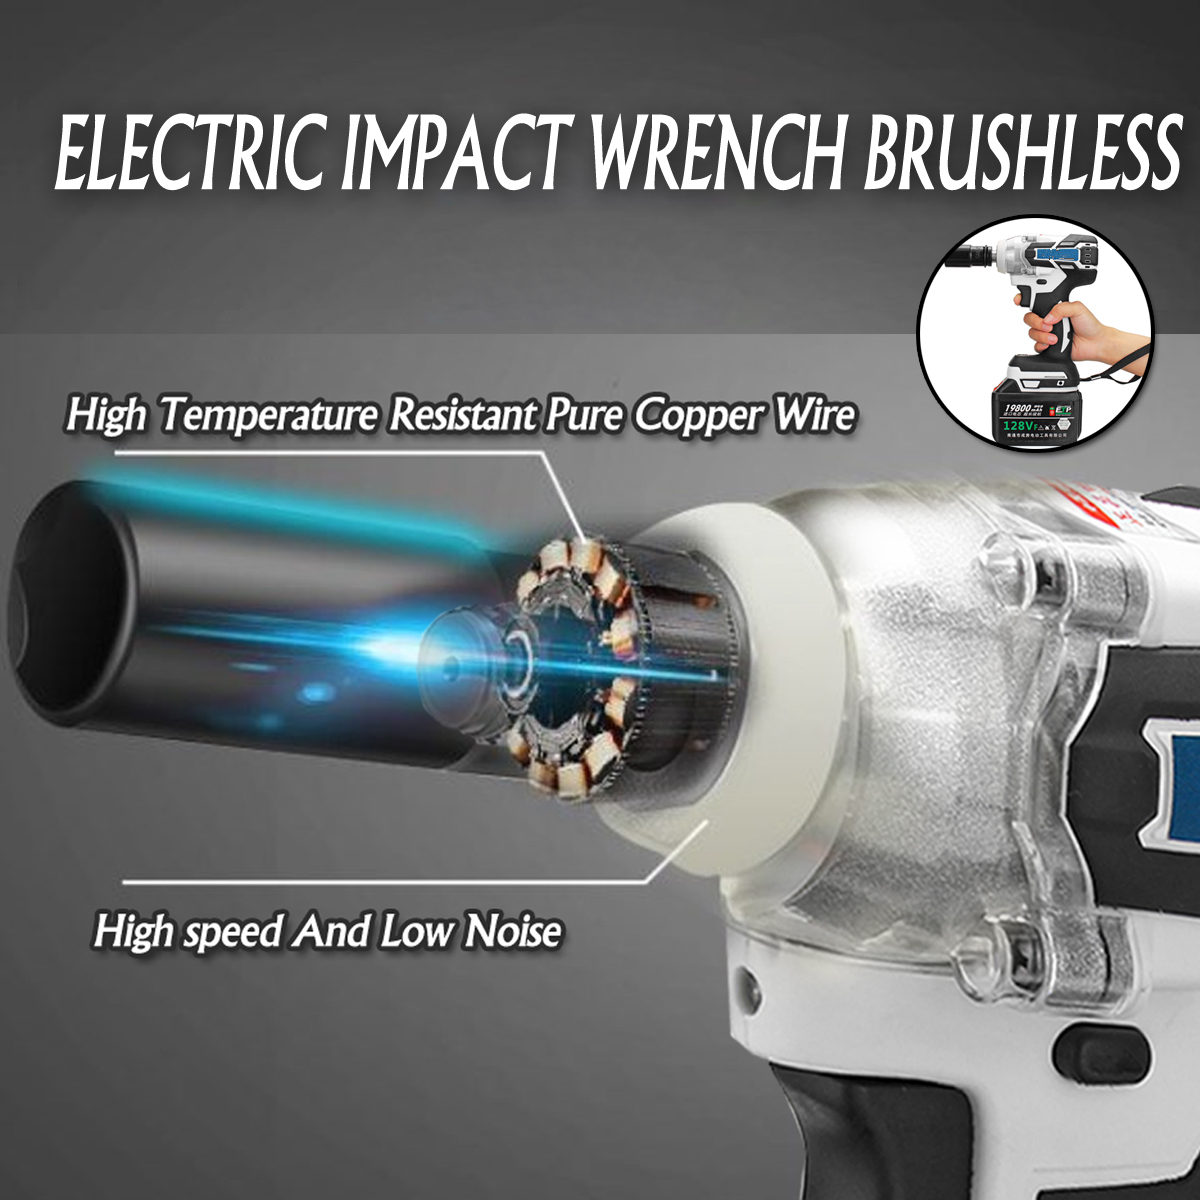 3-in-1 1280W 19800mAH Electric Brushless Drill Cordless Power Hammer Screwdriver Power Tools Lithium-Ion Battery Multifunction